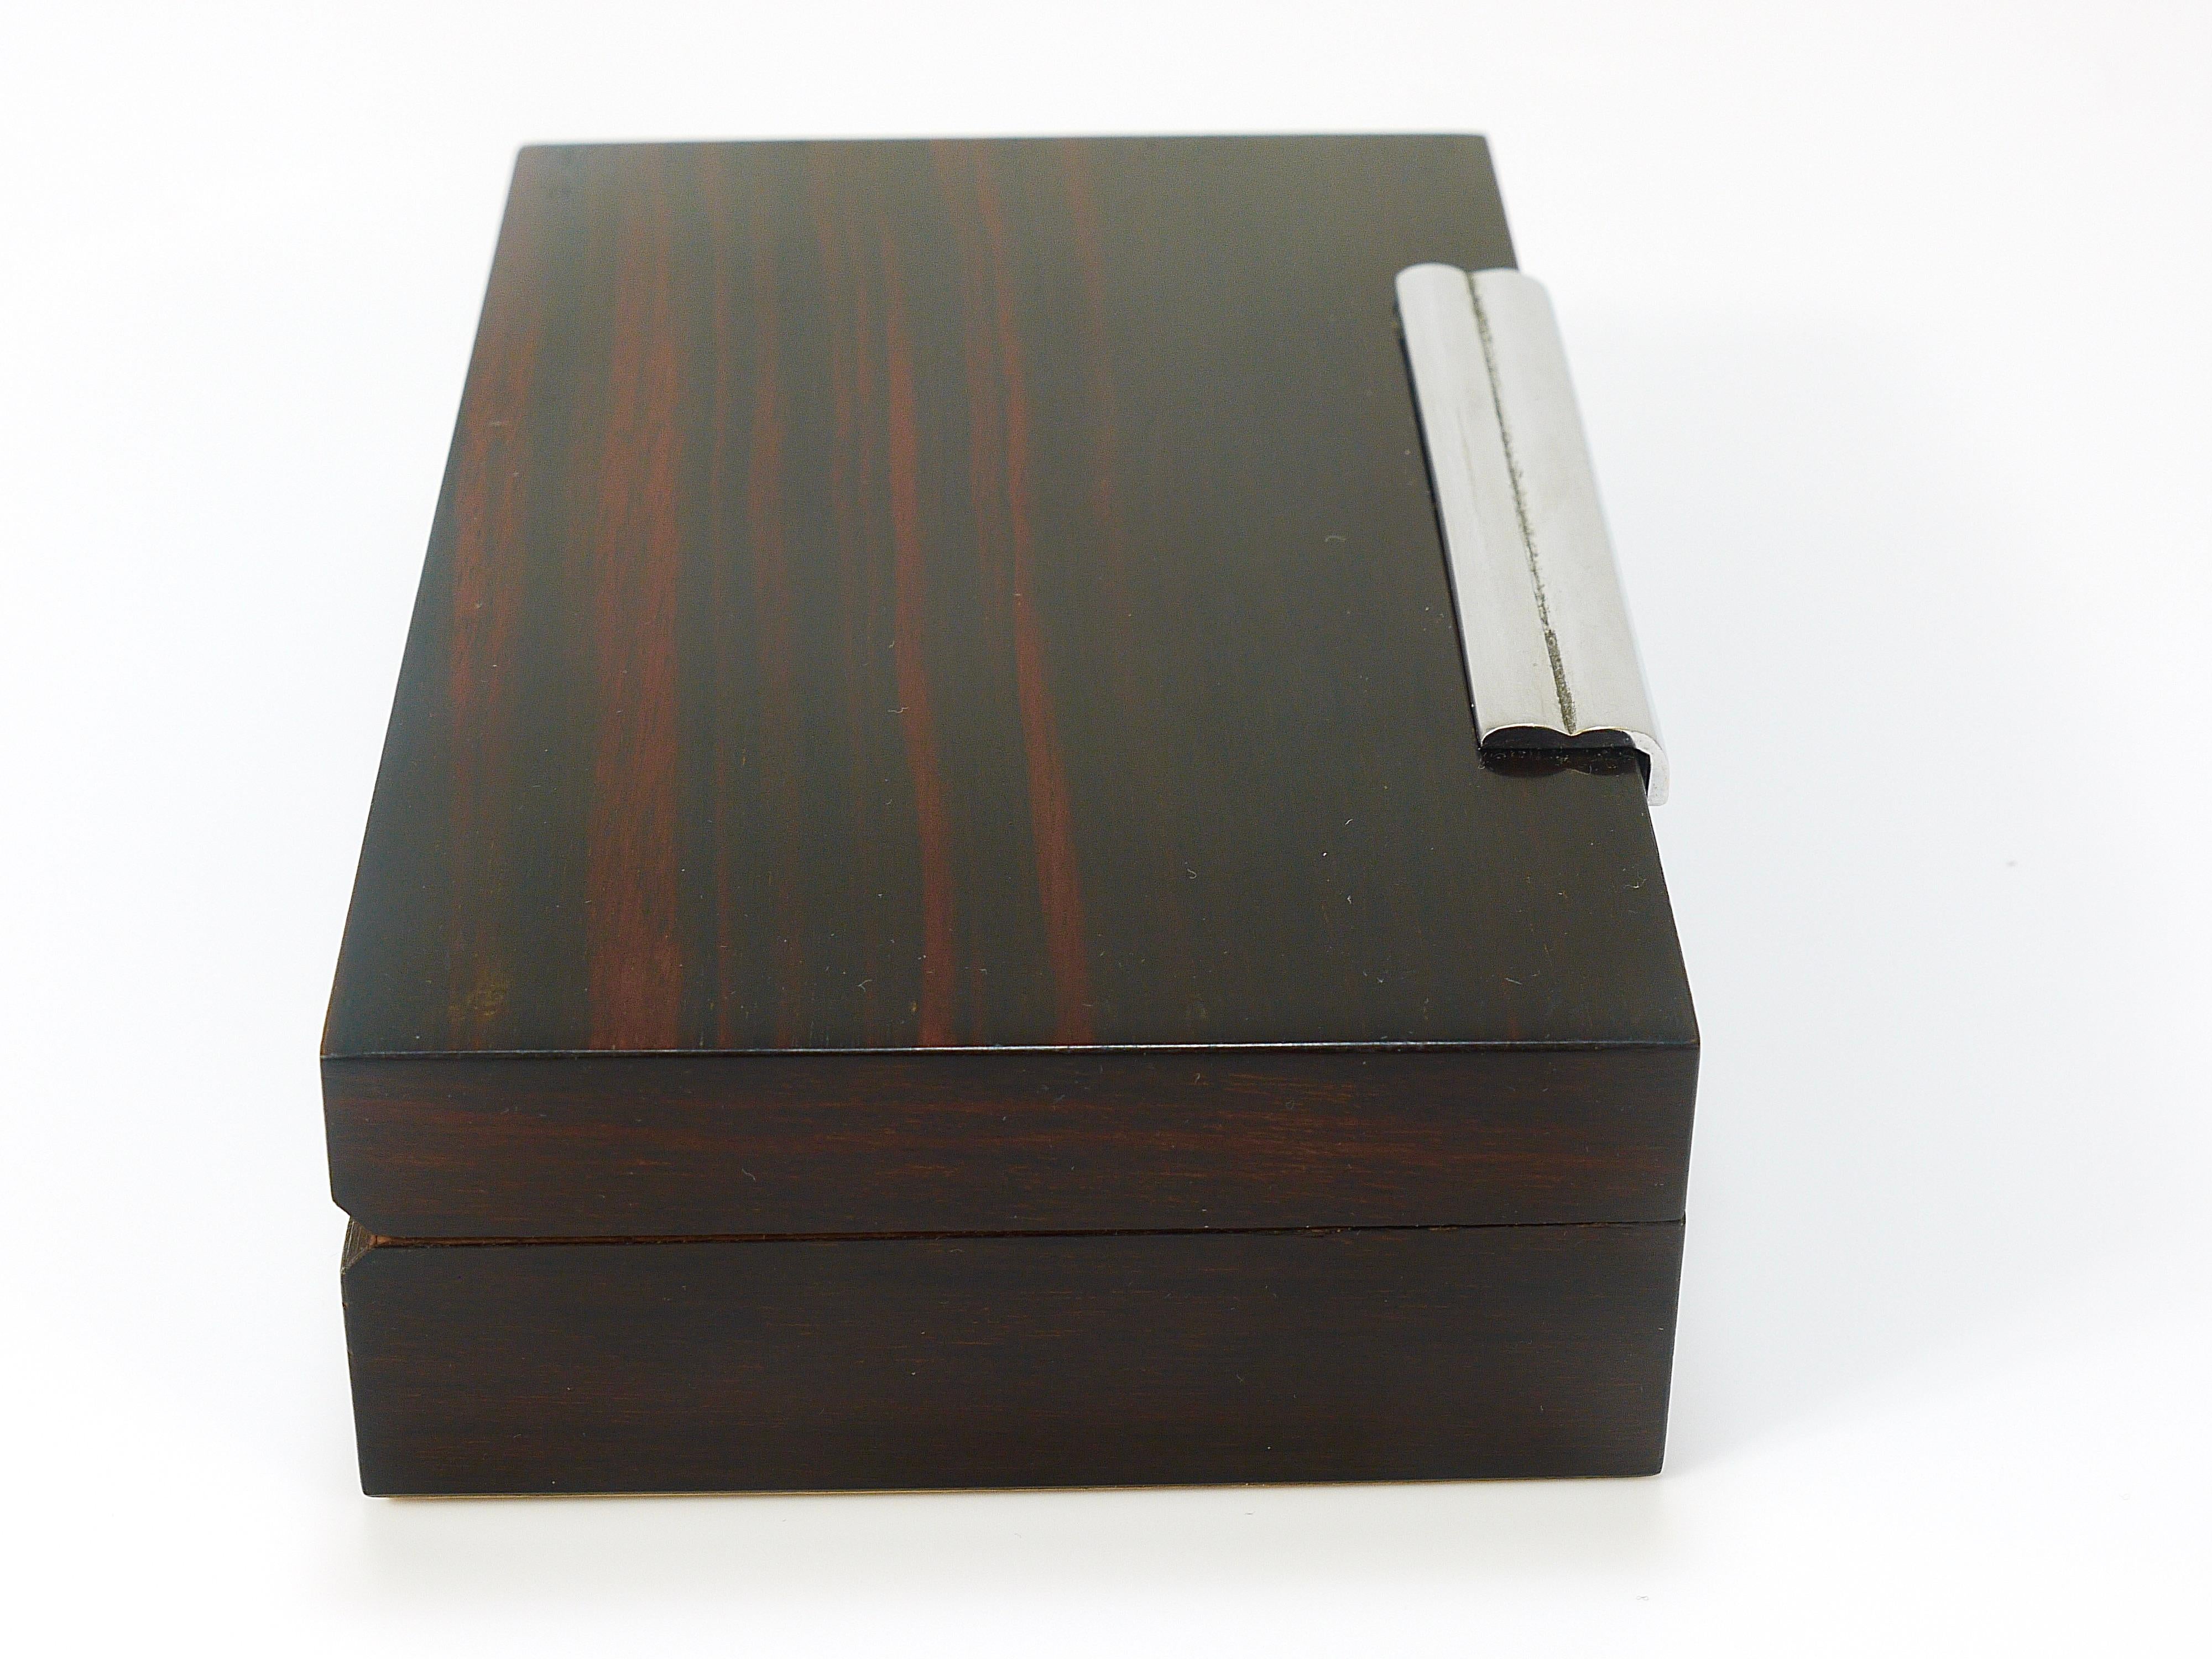 French Art Deco Rosewood & Nickel Storage Box, Maison Desny Style, France, 1930s For Sale 4